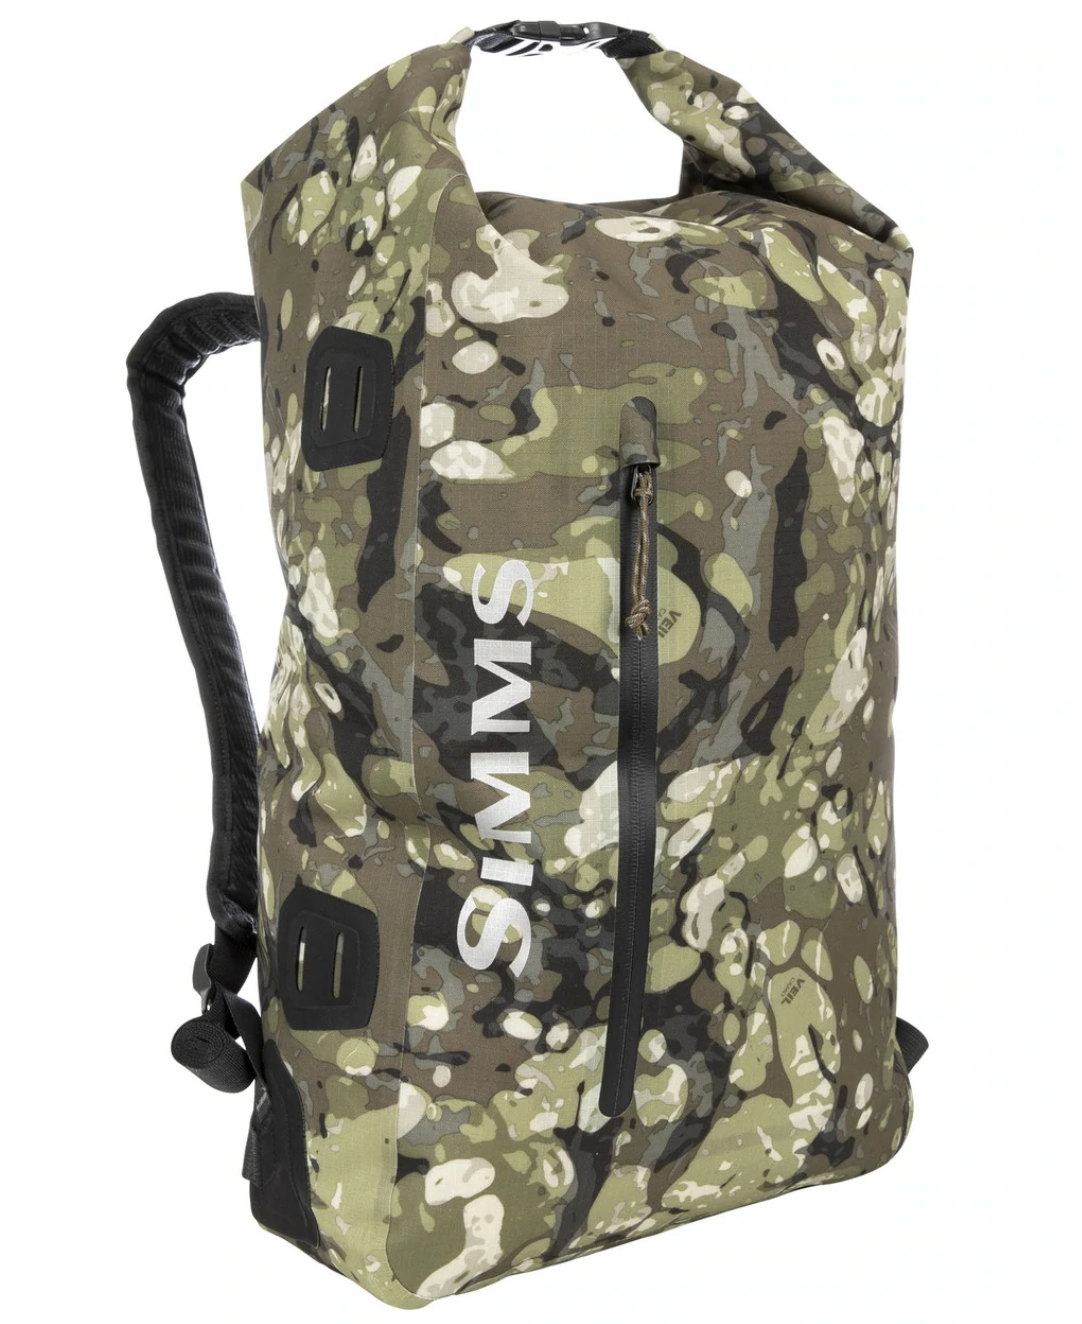 Simms Dry Creek Simple Pack 25l - Riparian Camo -  - Mansfield Hunting & Fishing - Products to prepare for Corona Virus